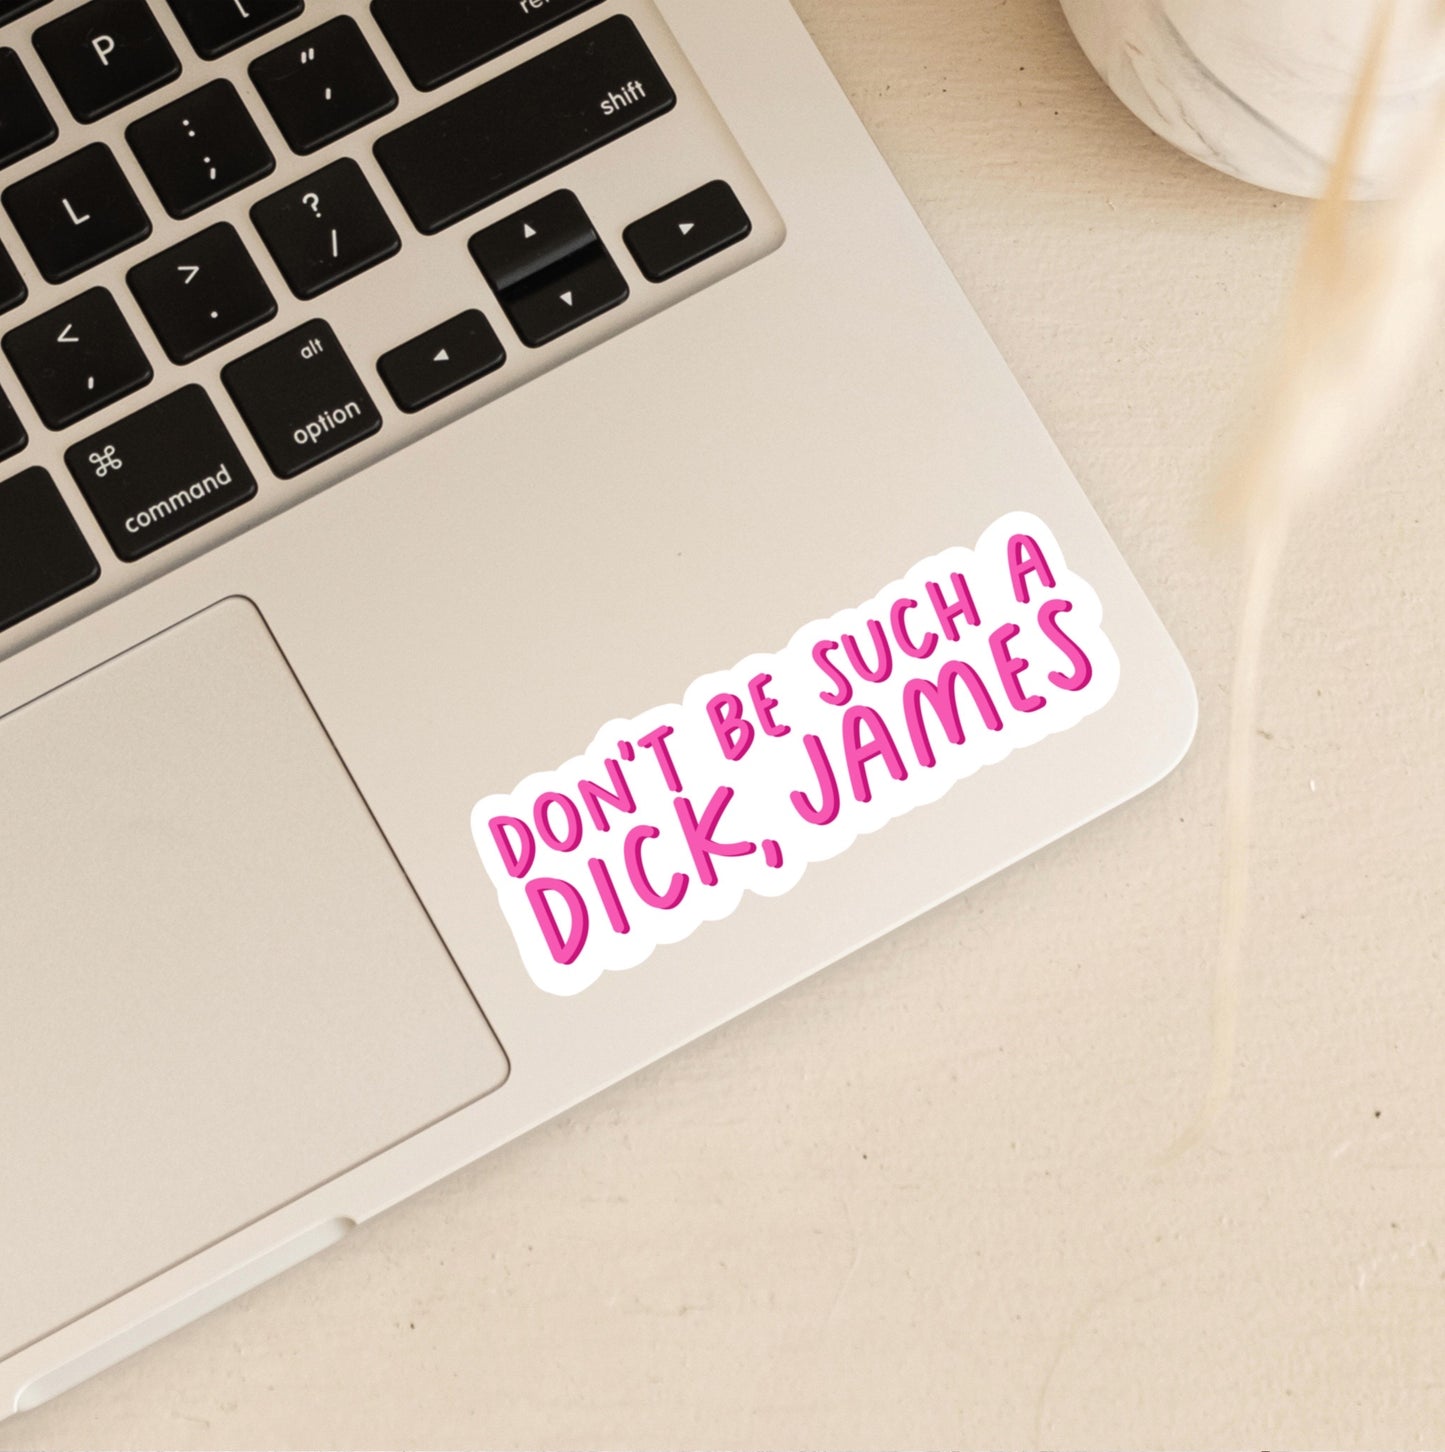 Don't Be Such a Dick James | Derry Girls Stickers